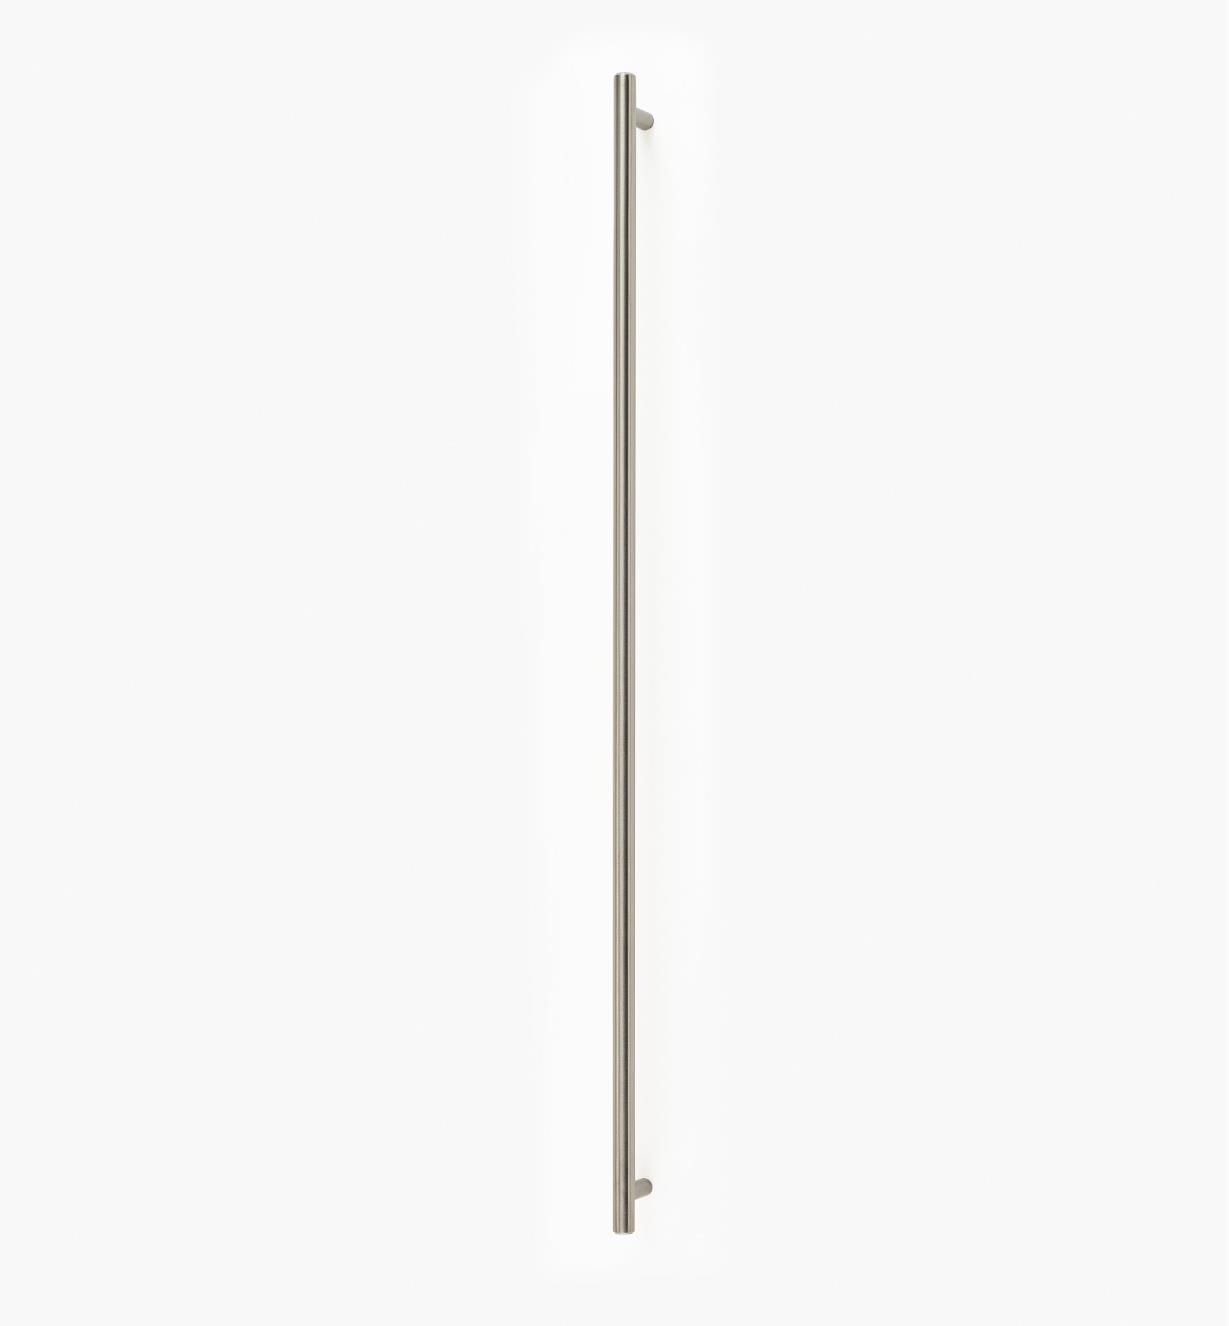 01W8317 - 600mm (23 5/8") Stainless Steel Bar Handle